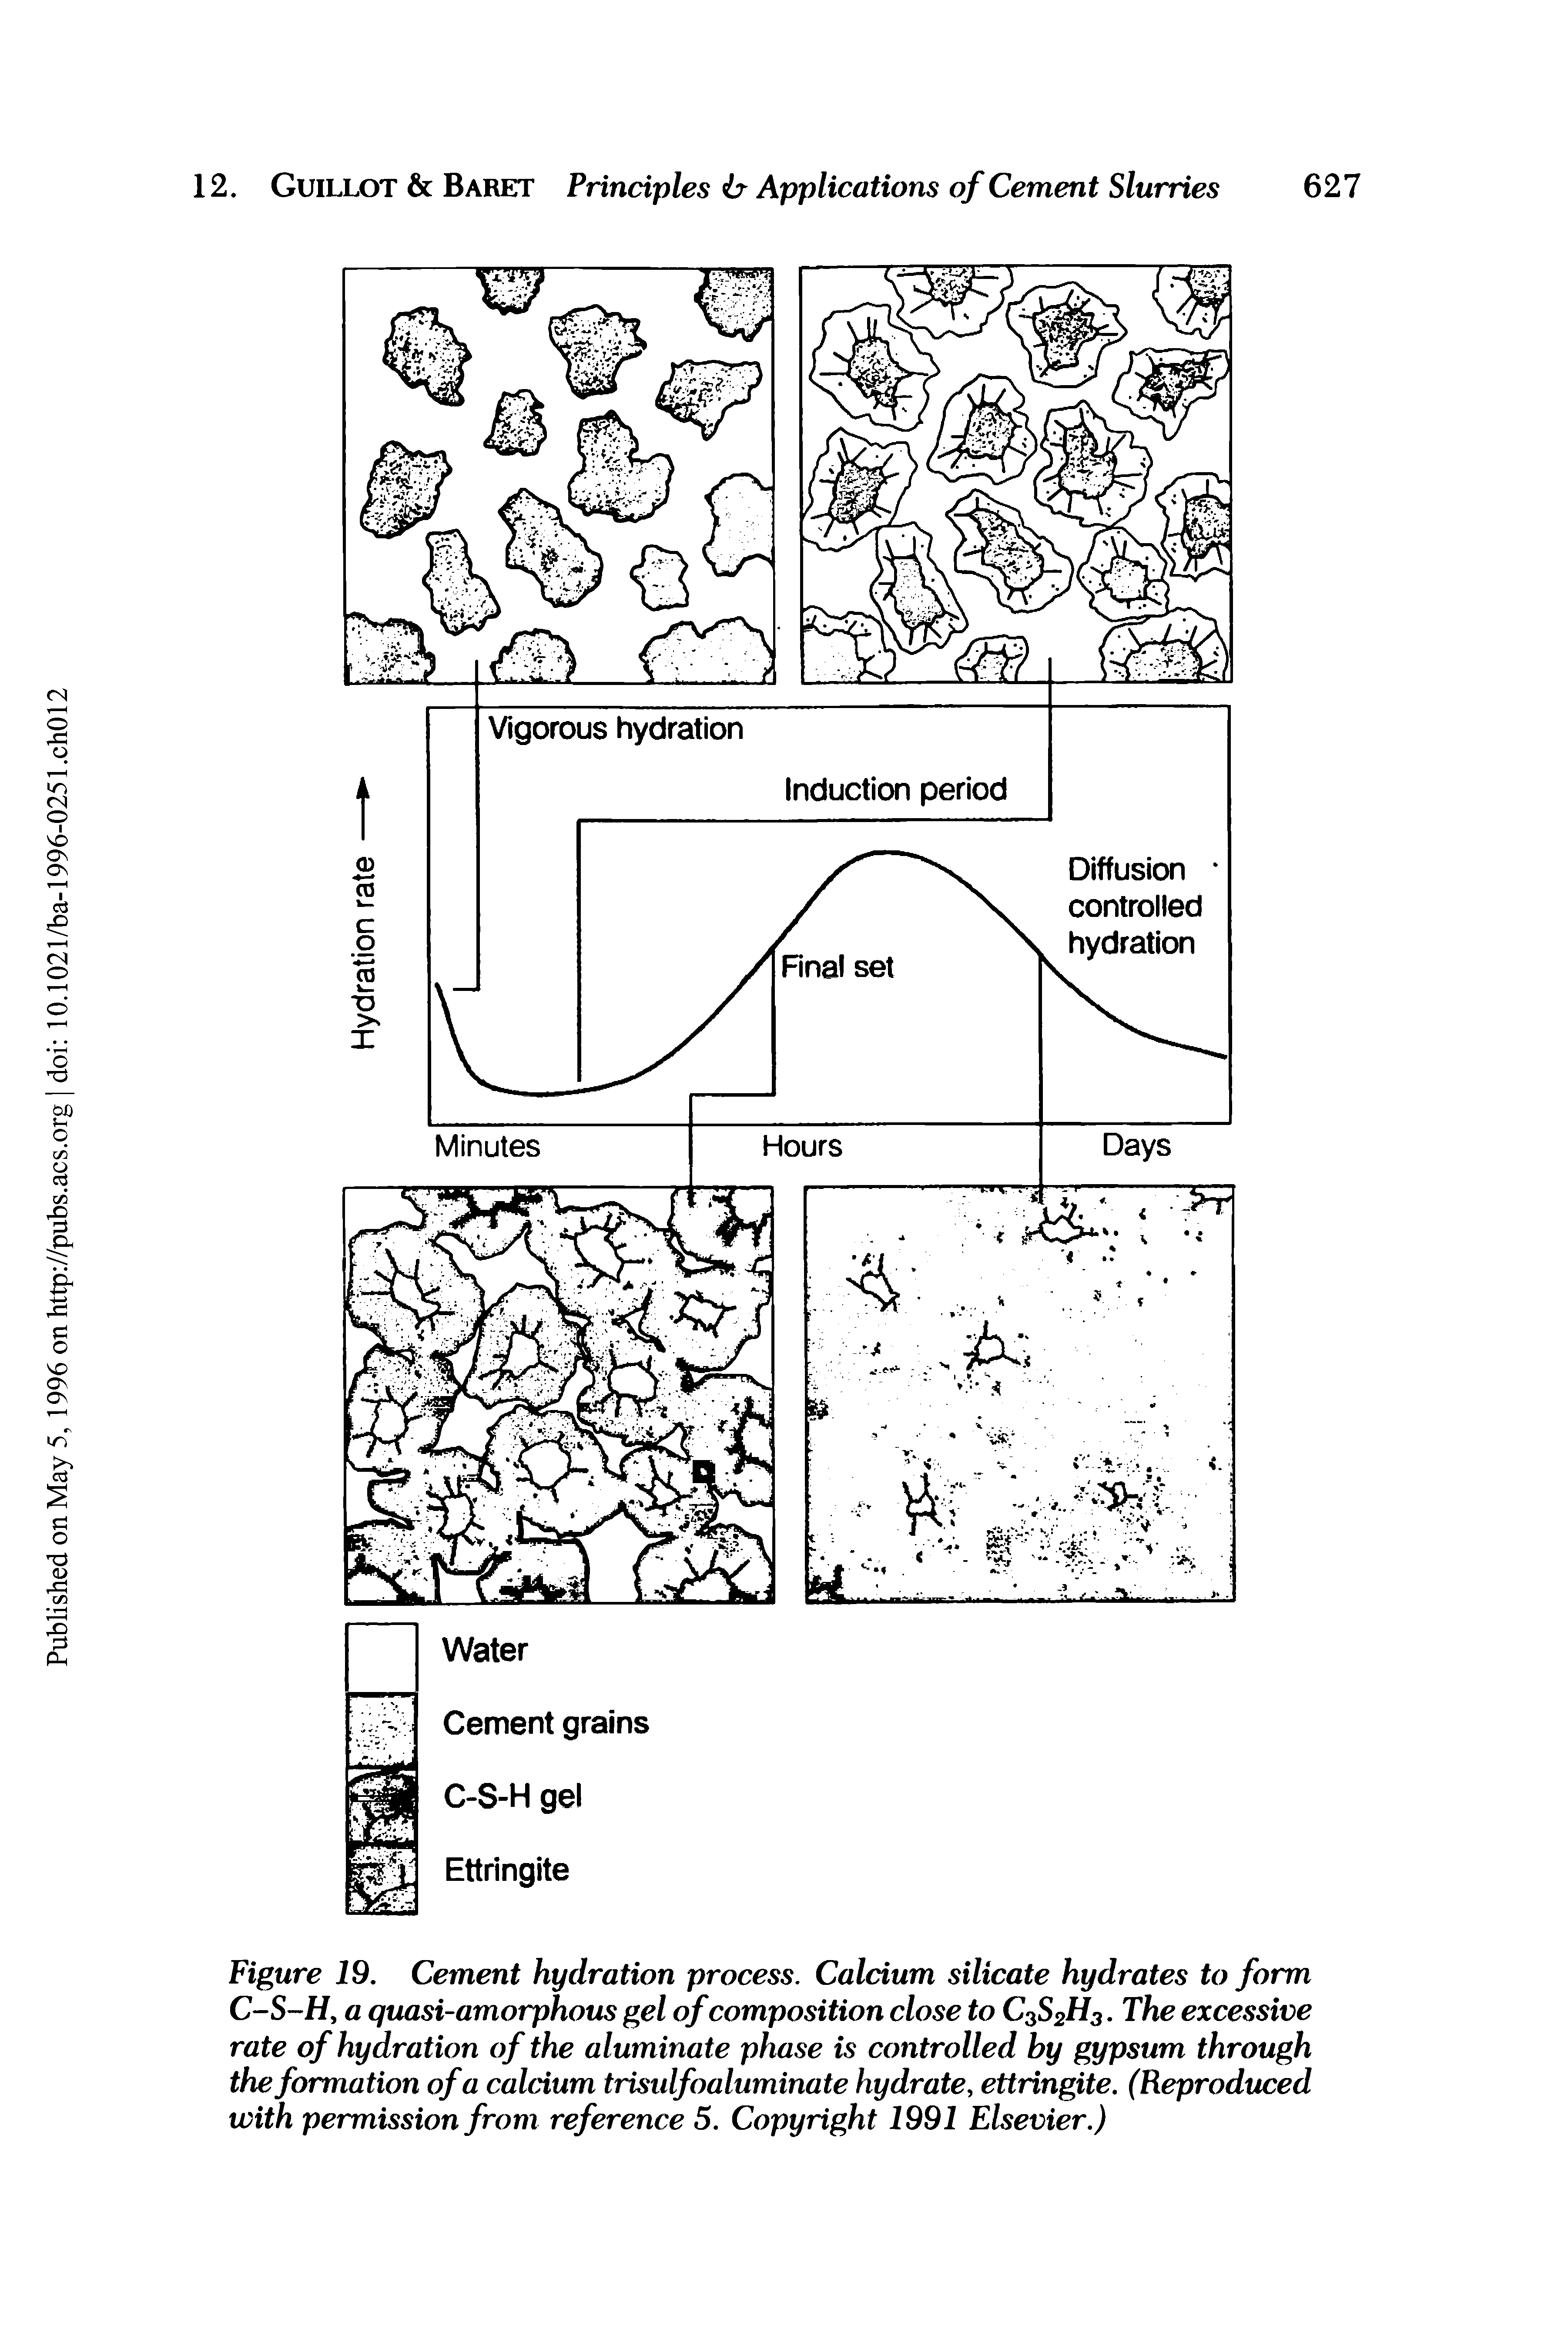 Figure 19. Cement hydration process. Calcium silicate hydrates to form C-S-H, a quasi-amorphous gel of composition close to C3S2H3. The excessive rate of hydration of the aluminate phase is controlled by gypsum through the formation of a calcium trisidfoaluminate hydrate, ettringite. (Reproduced with permission from reference 5. Copyright 1991 Elsevier.)...